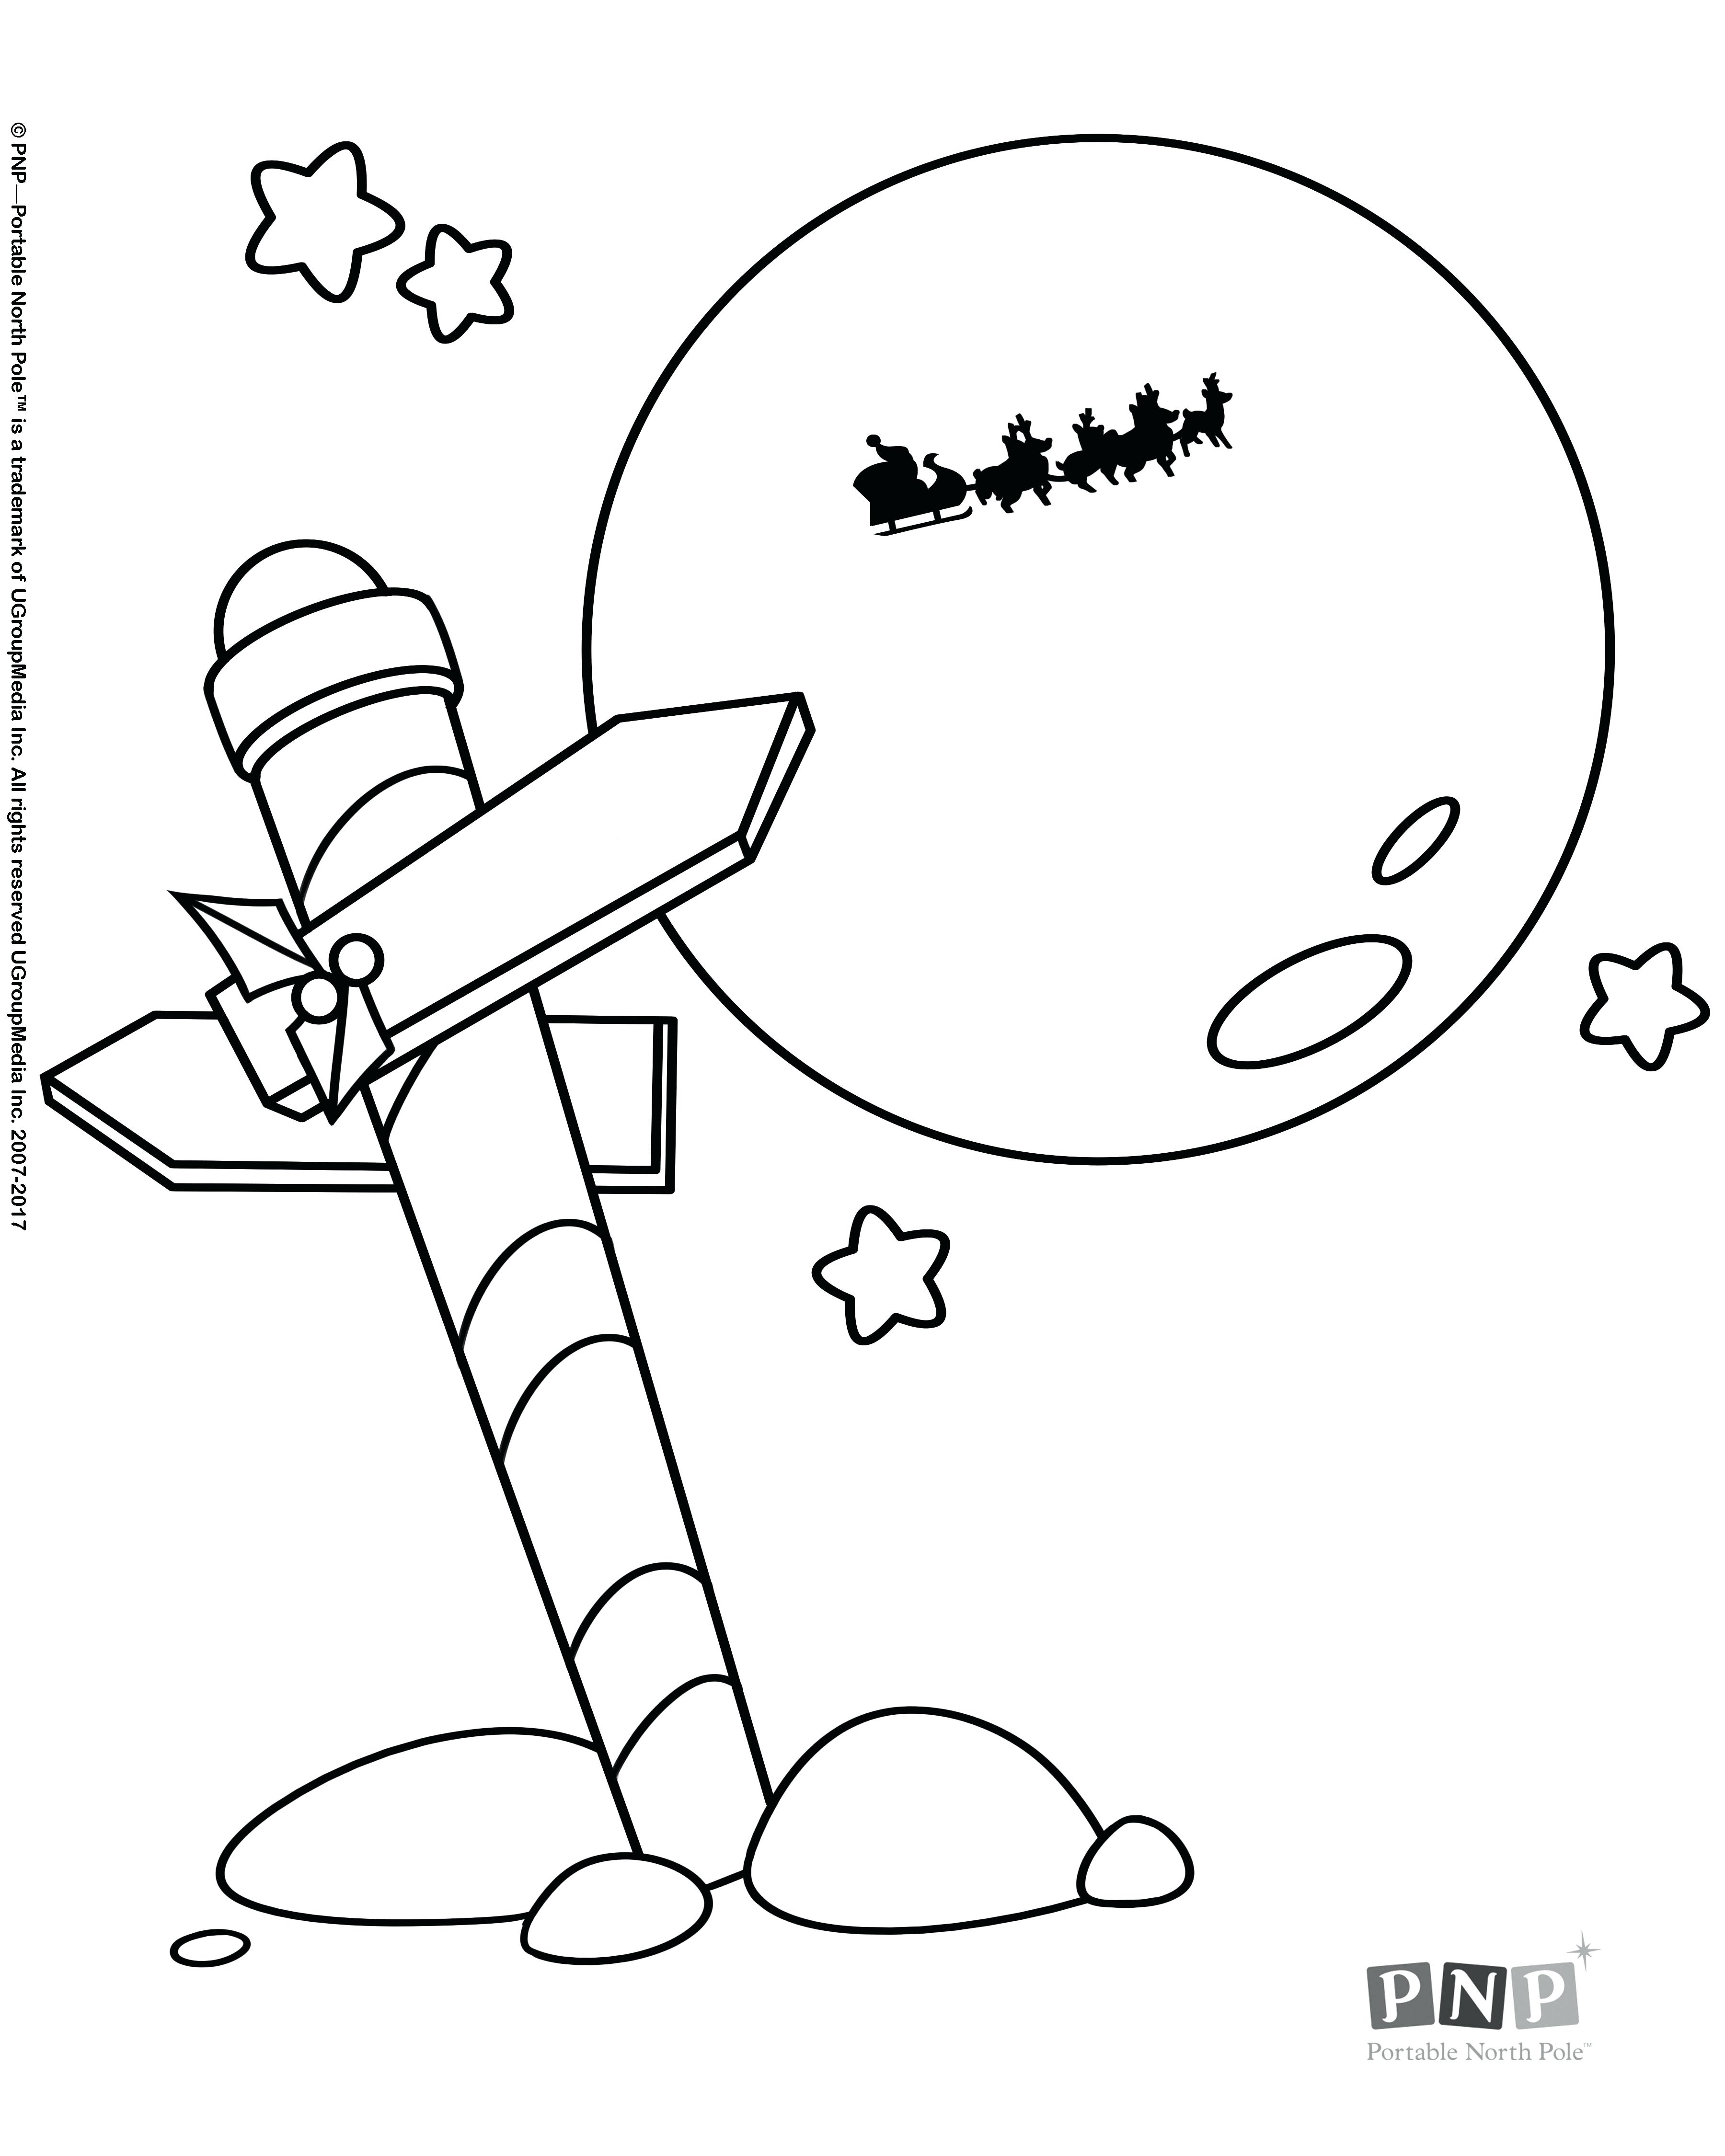 north-pole-coloring-pages-at-getcolorings-free-printable-colorings-pages-to-print-and-color